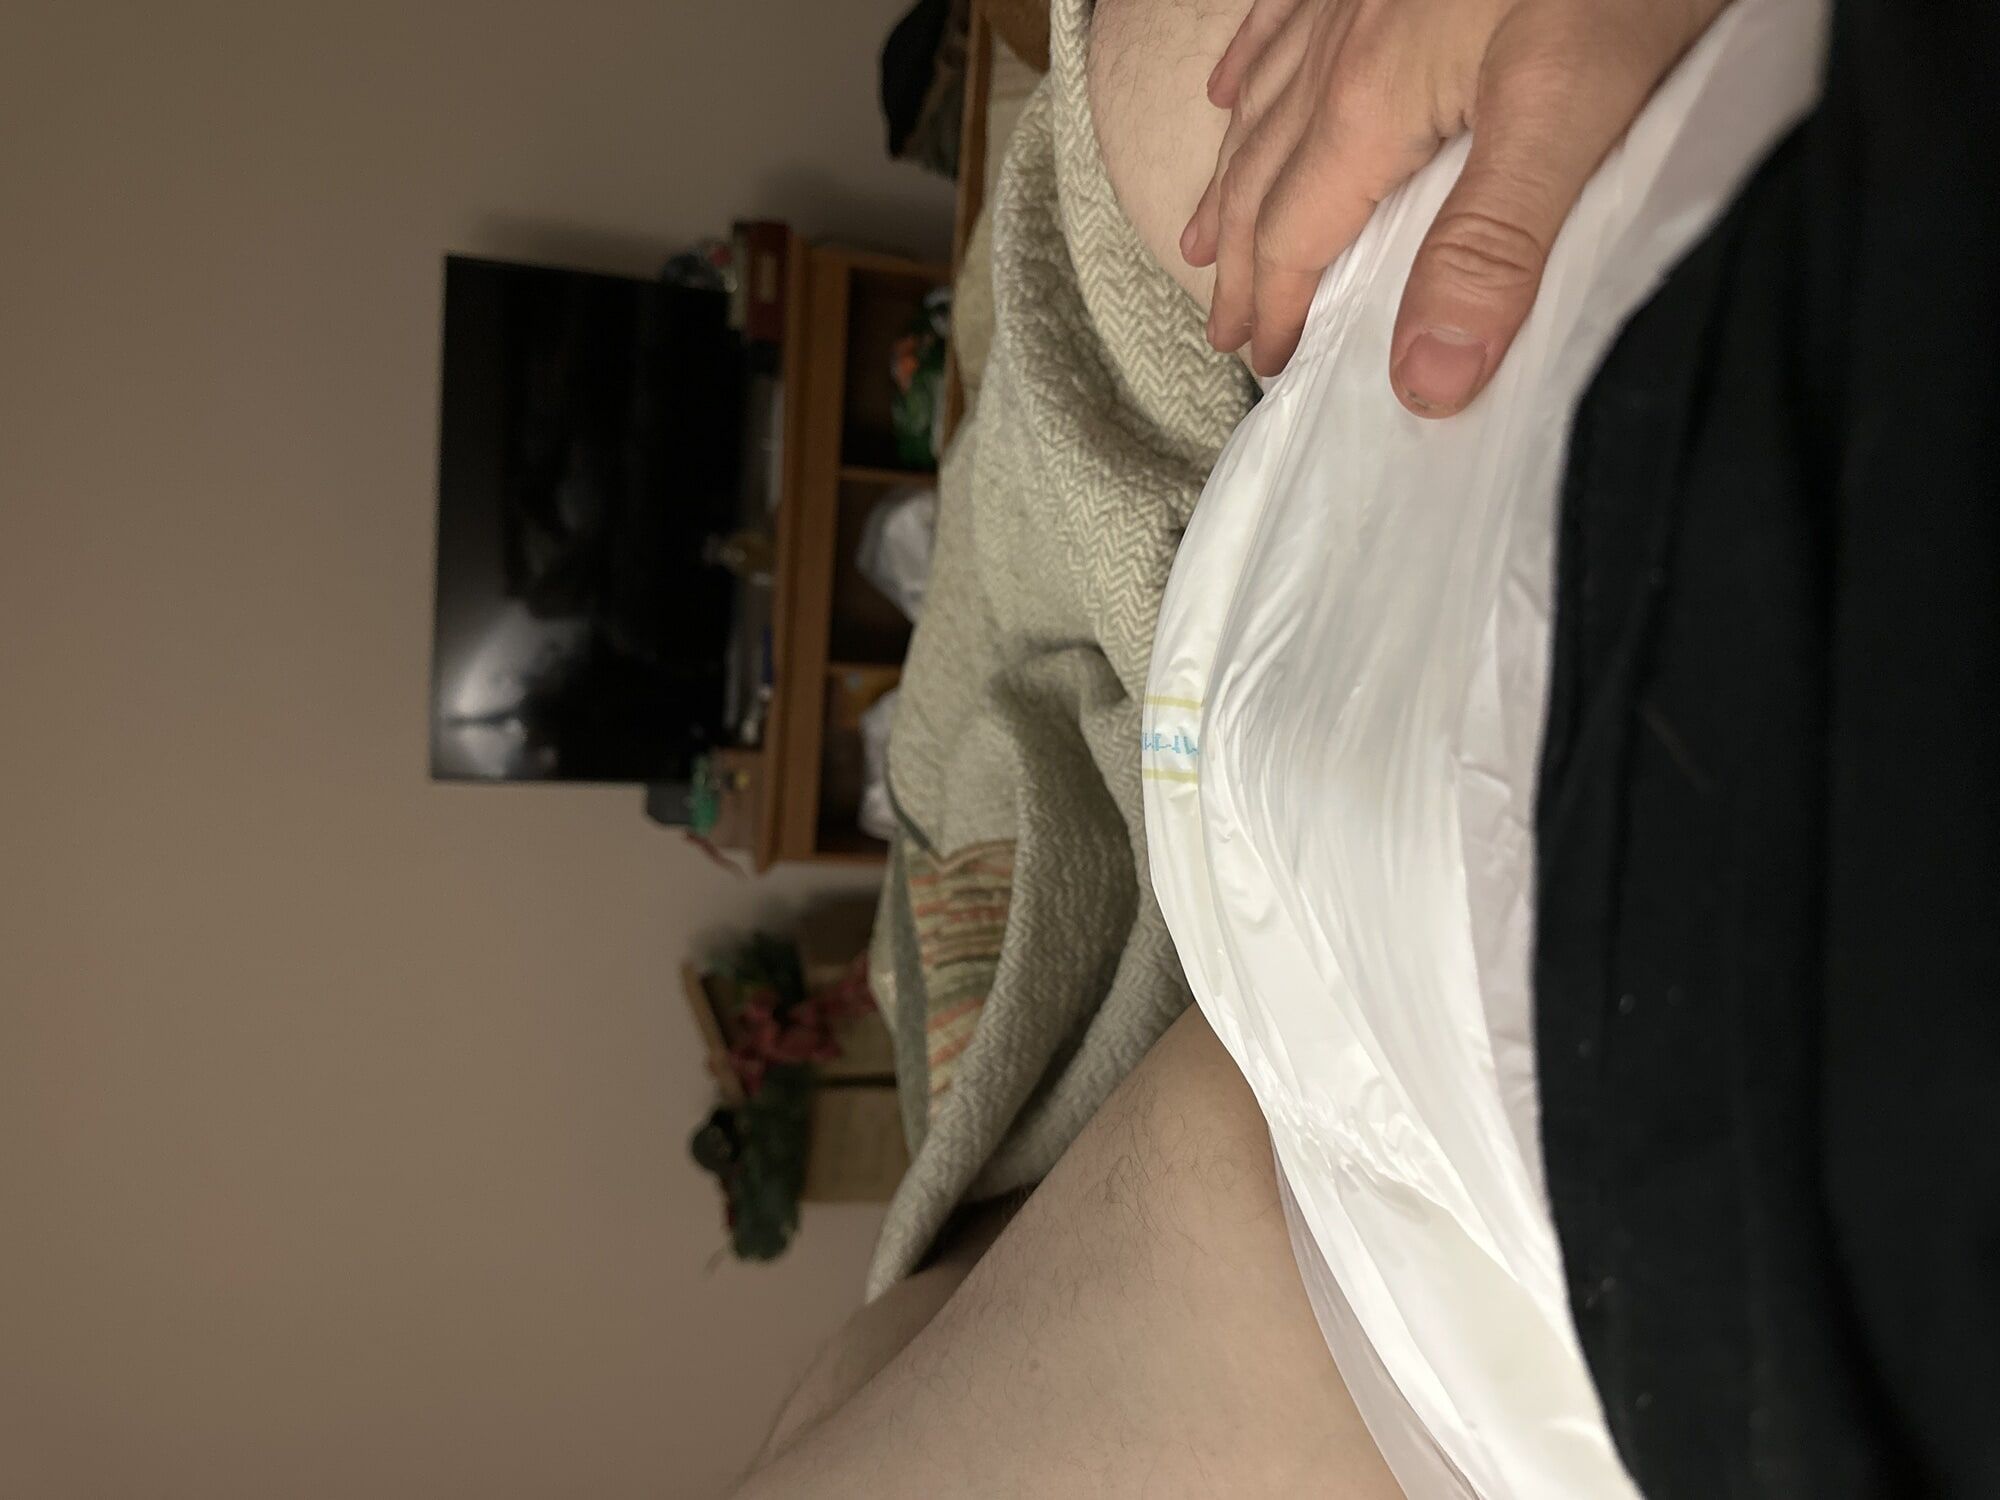 Wearing my diapers #3